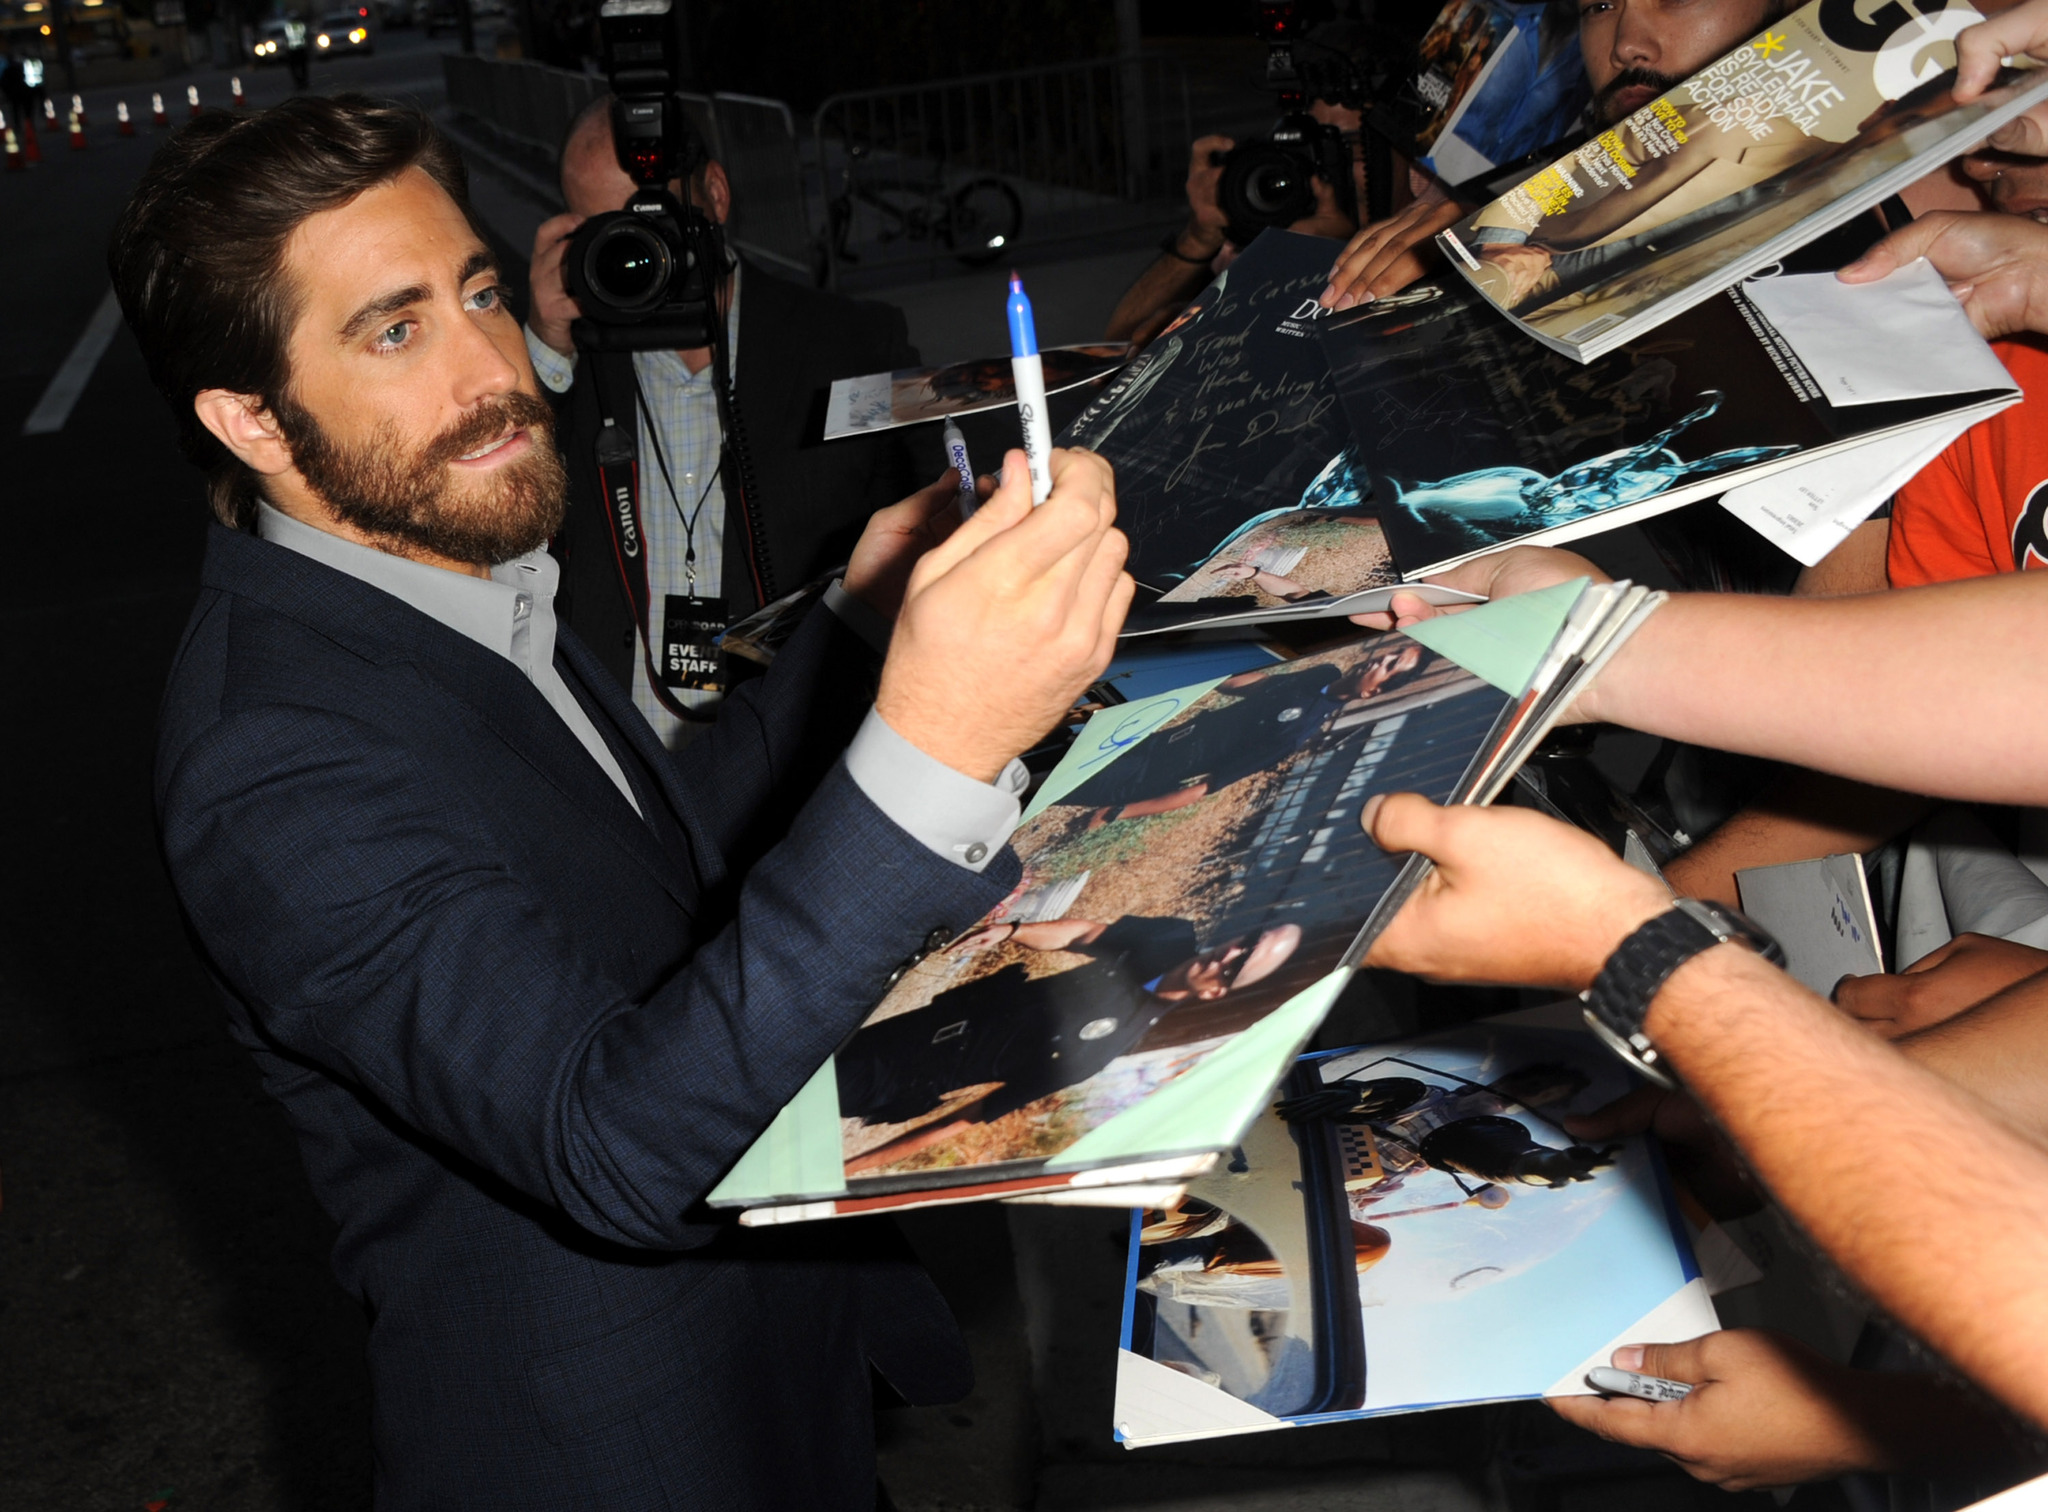 Jake Gyllenhaal at event of End of Watch (2012)